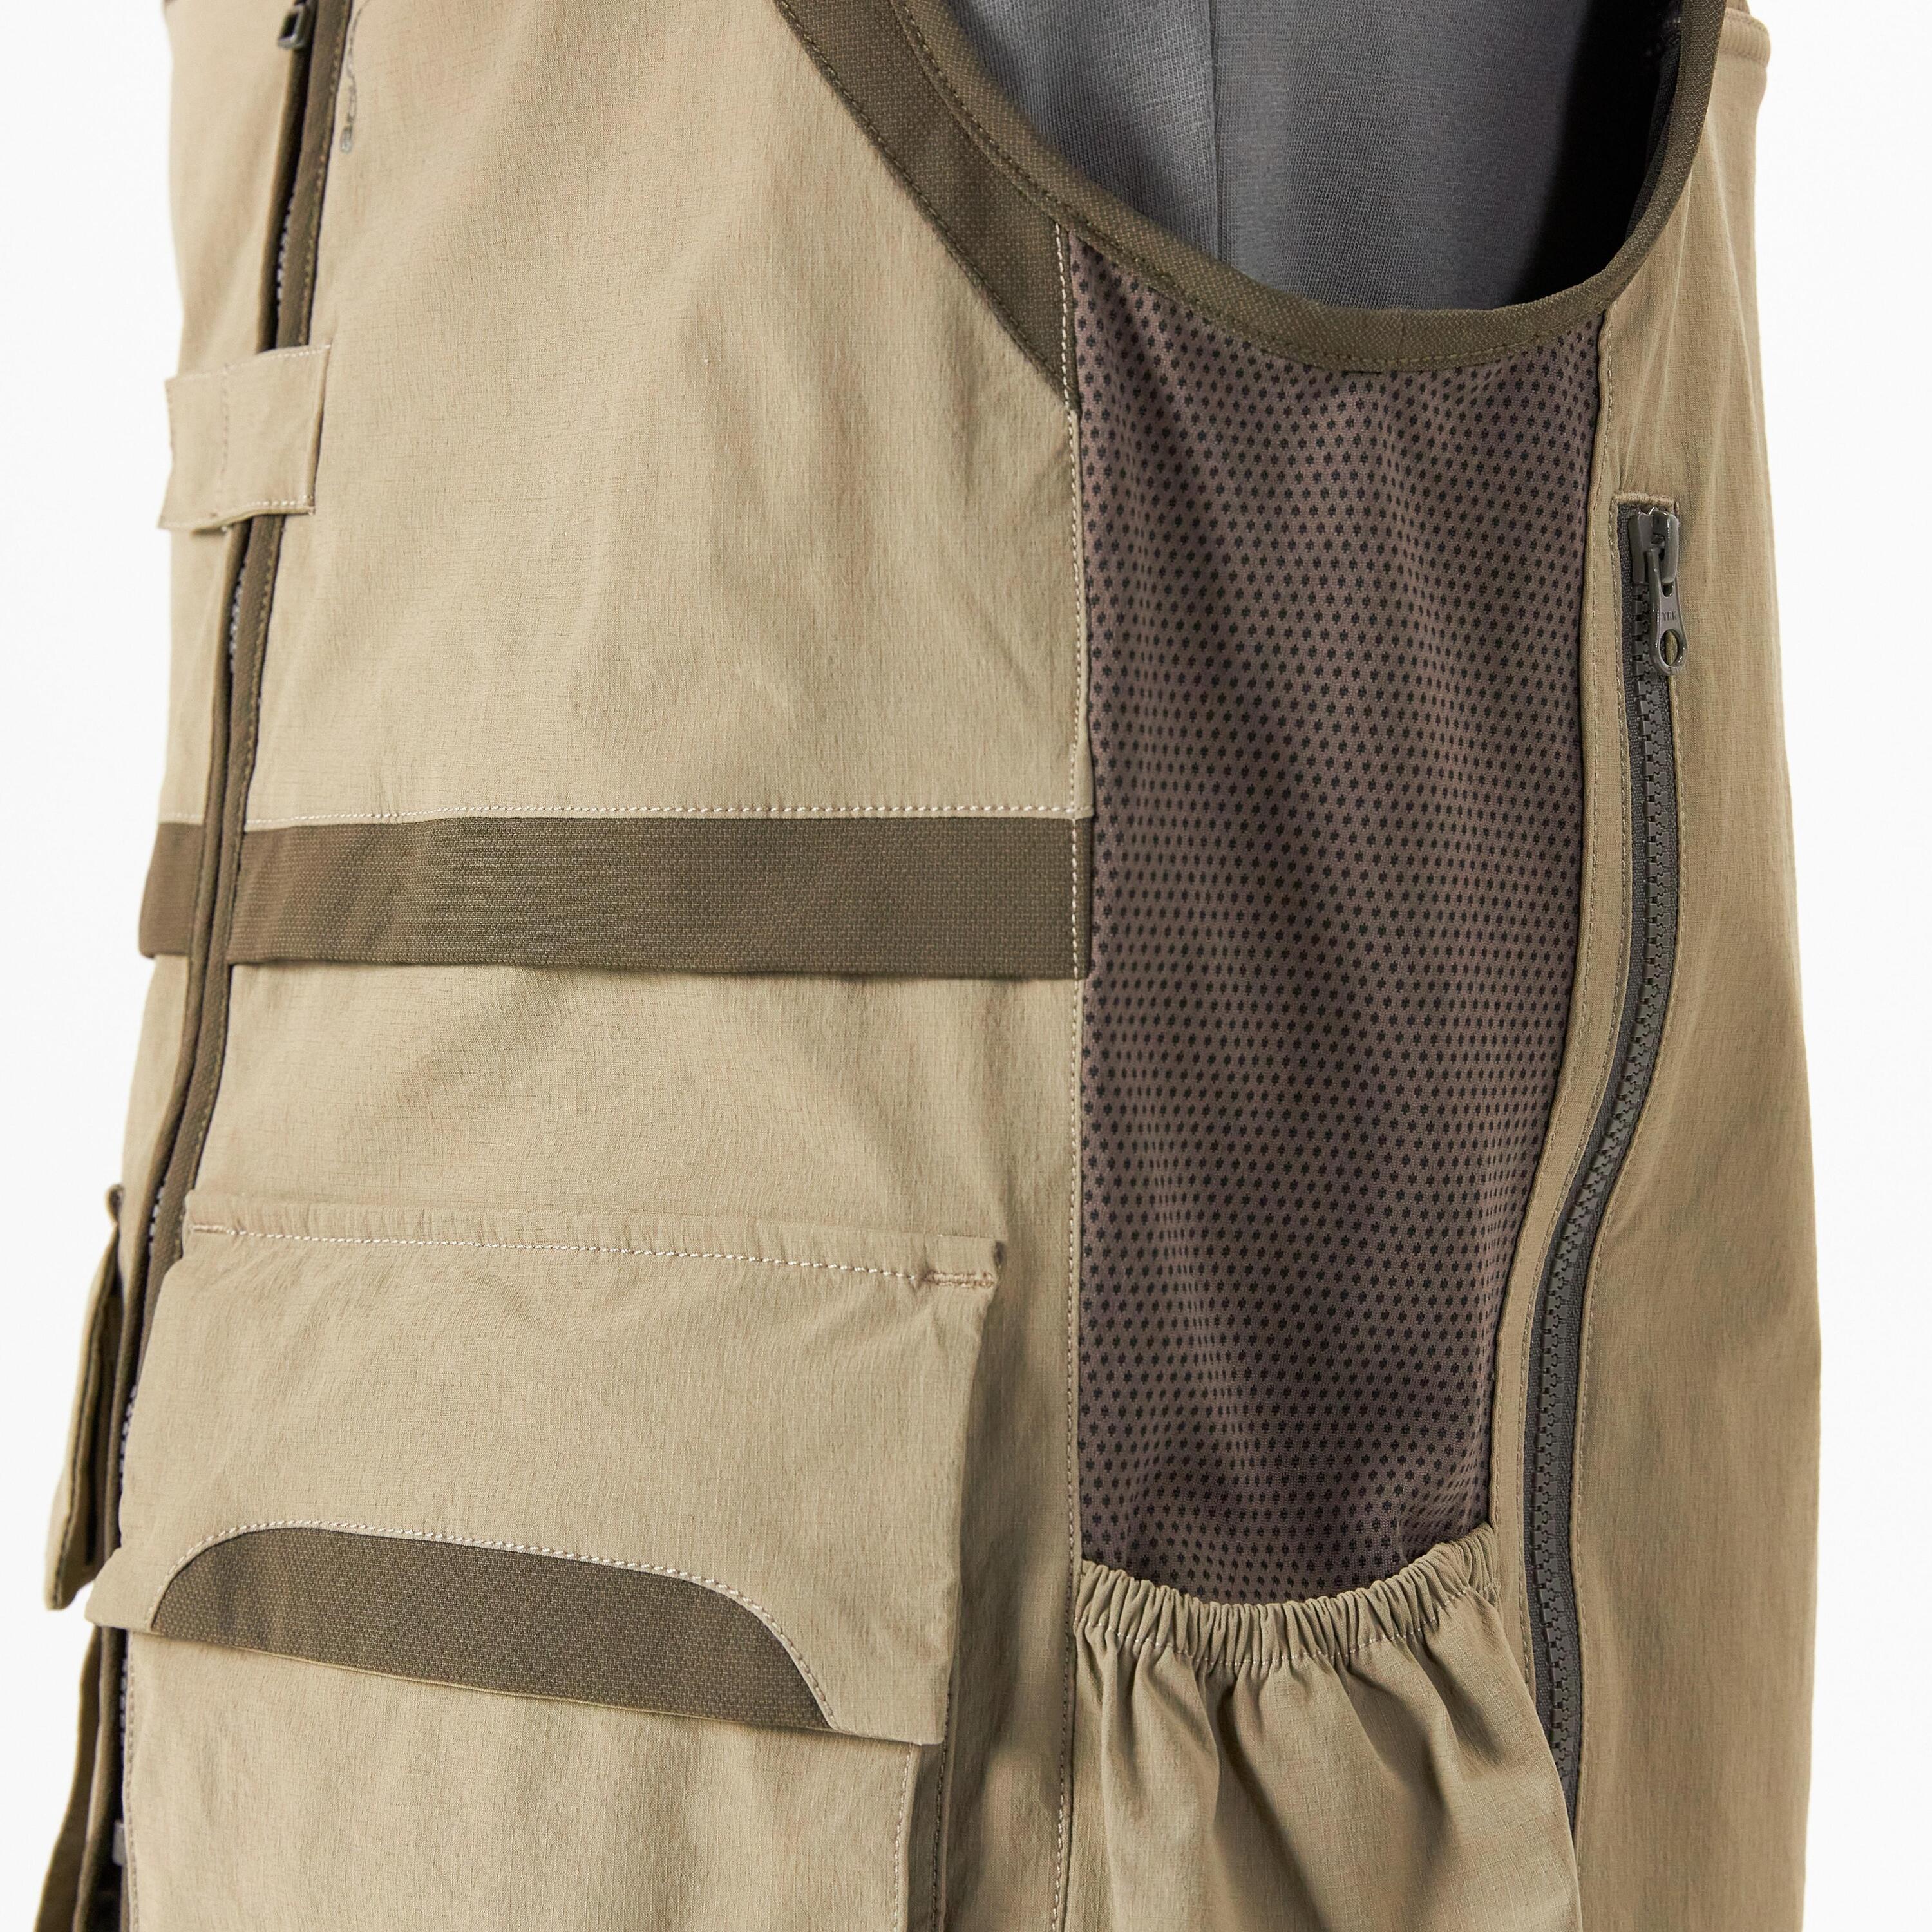 Lightweight and Breathable Waistcoat - Green 7/10